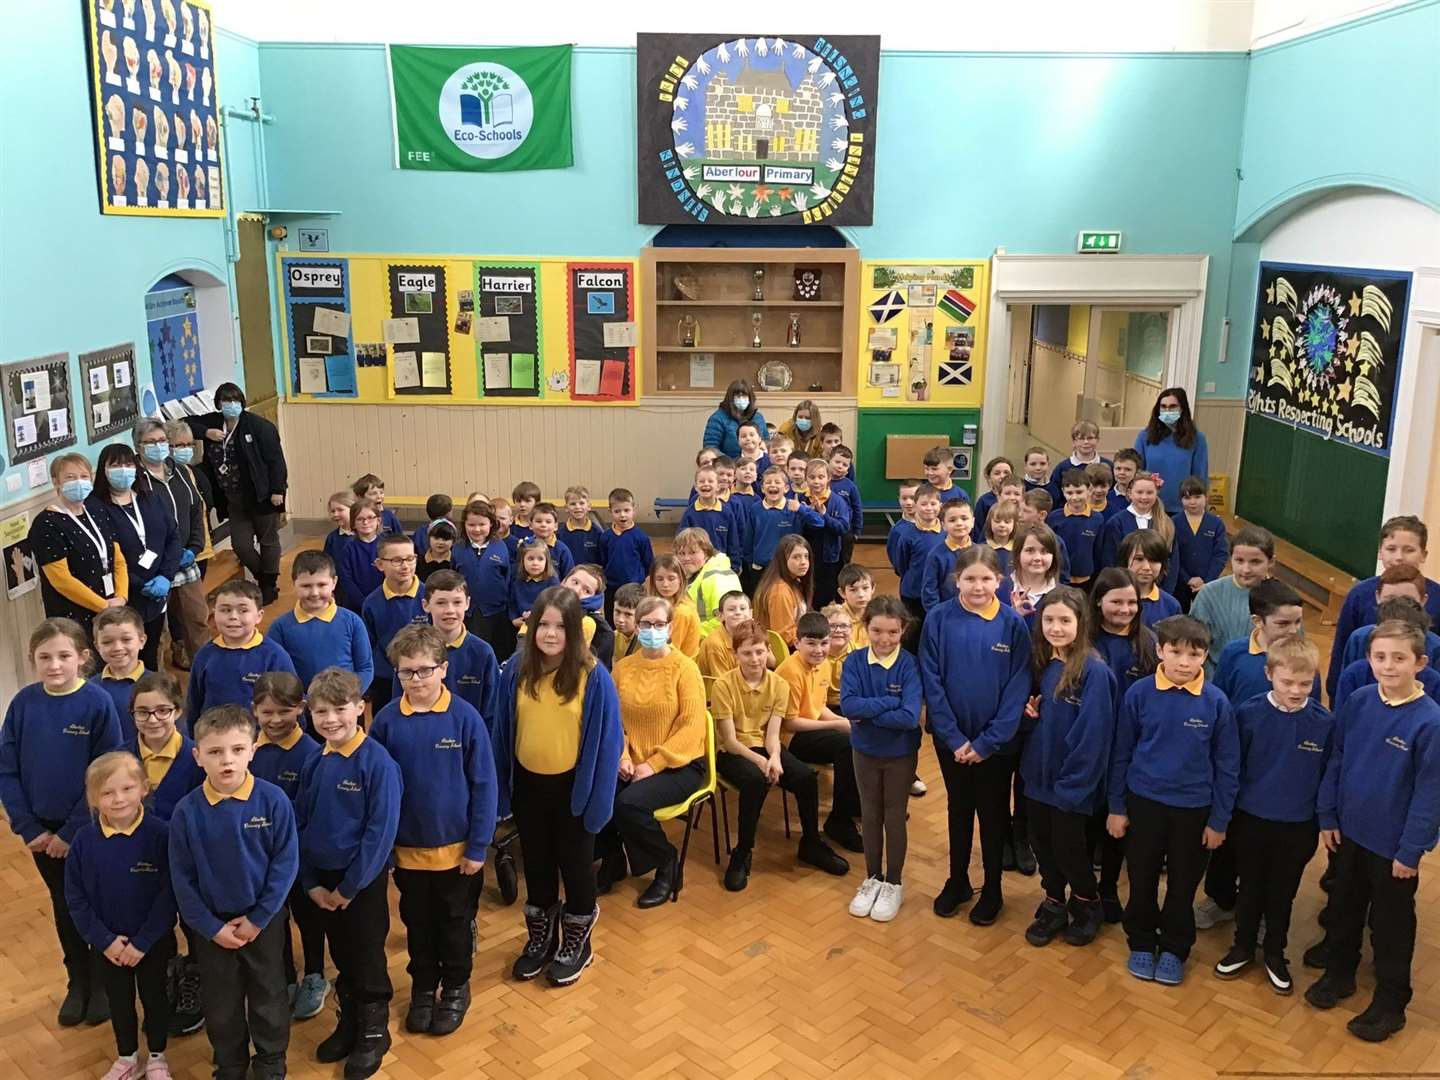 Aberlour Primary showed their support by forming a sunflower together in their blue and yellow uniforms.